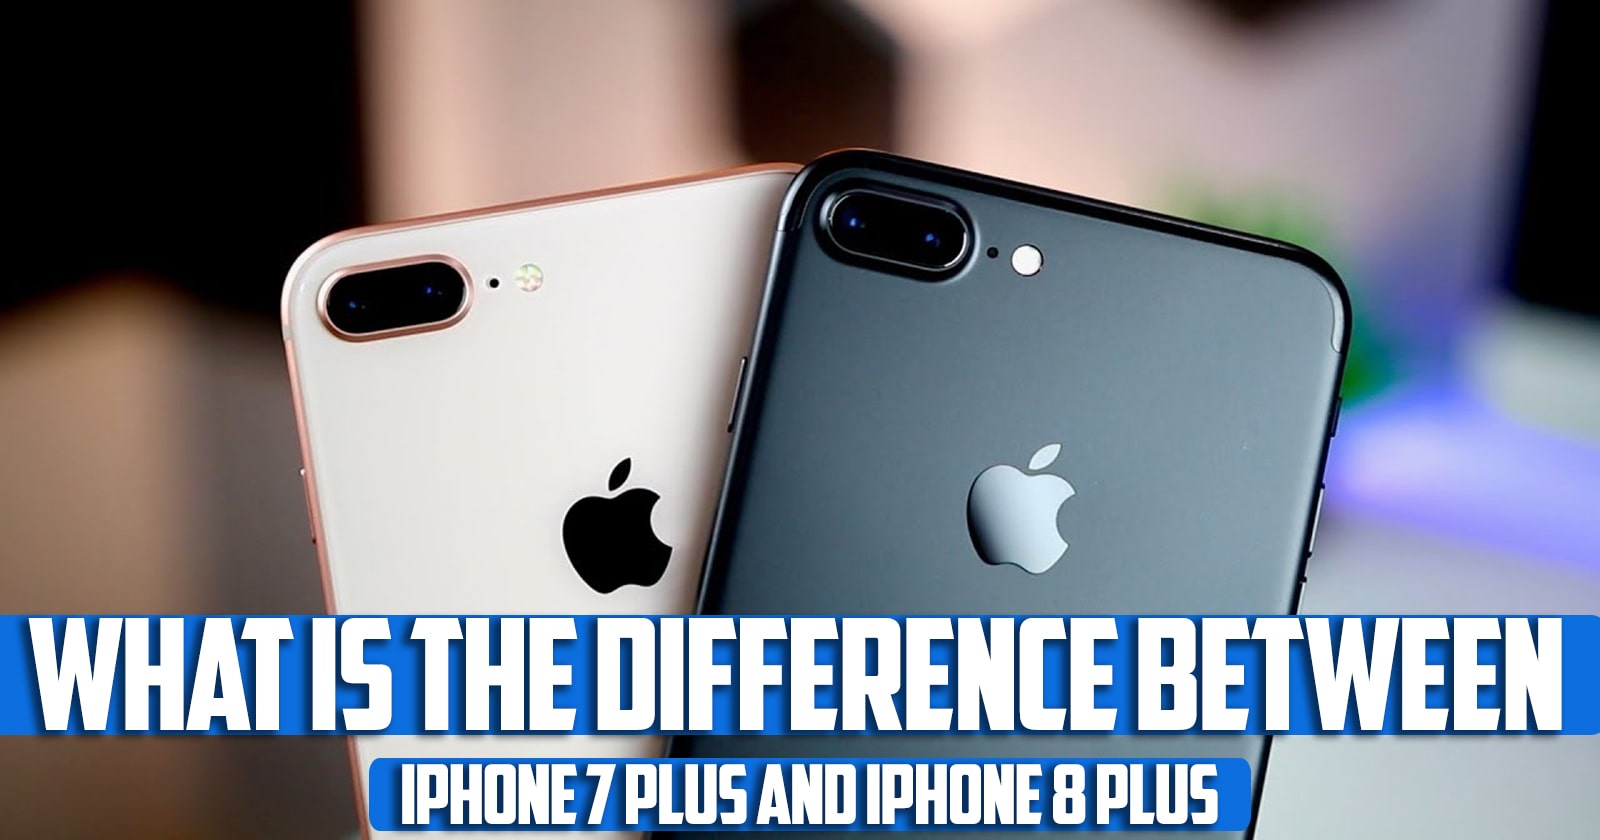 What is the difference between iPhone 7 plus and iPhone 8 plus?